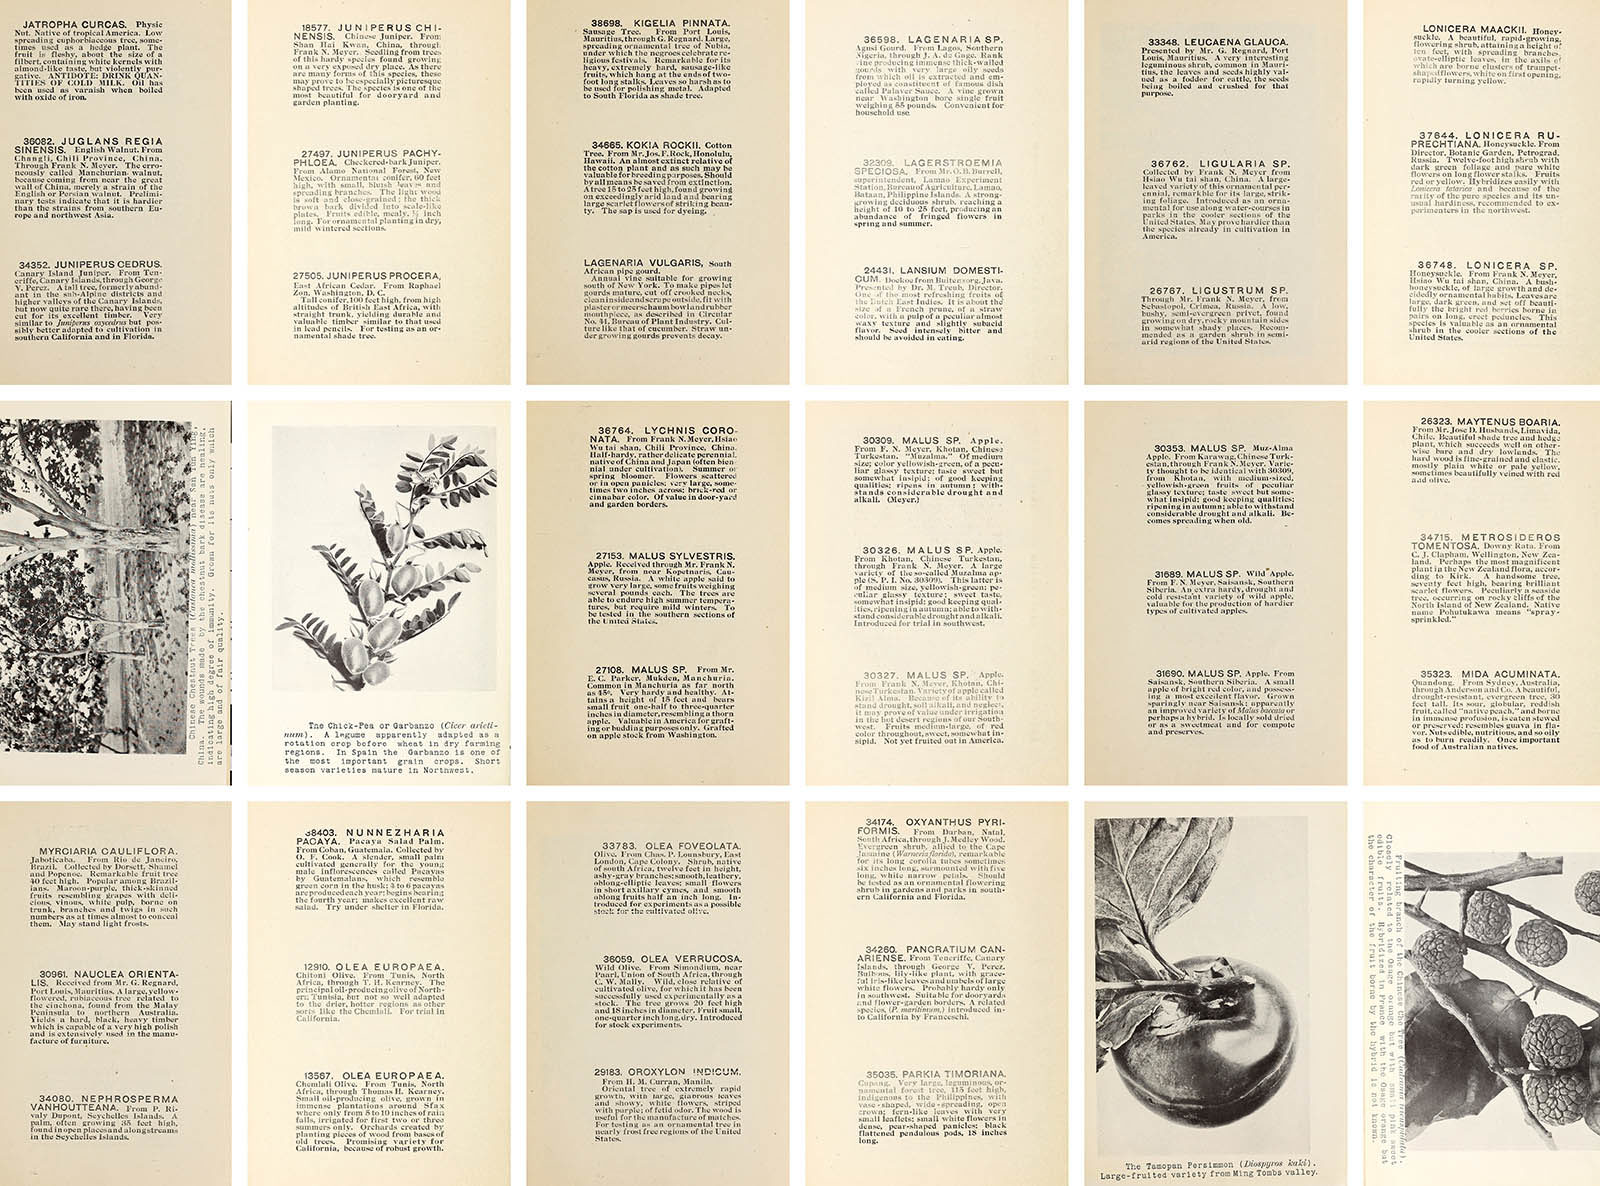 Pages from US Office of Foreign Seed and Plant Introduction's, New Plant Introductions 1914–1915 (Washington: Government Printing Office, 1915), 73-90, featuring electrotyped descriptions of imported plants sent to SPI cooperators, each with its assigned Plant Introduction (PI) Number.